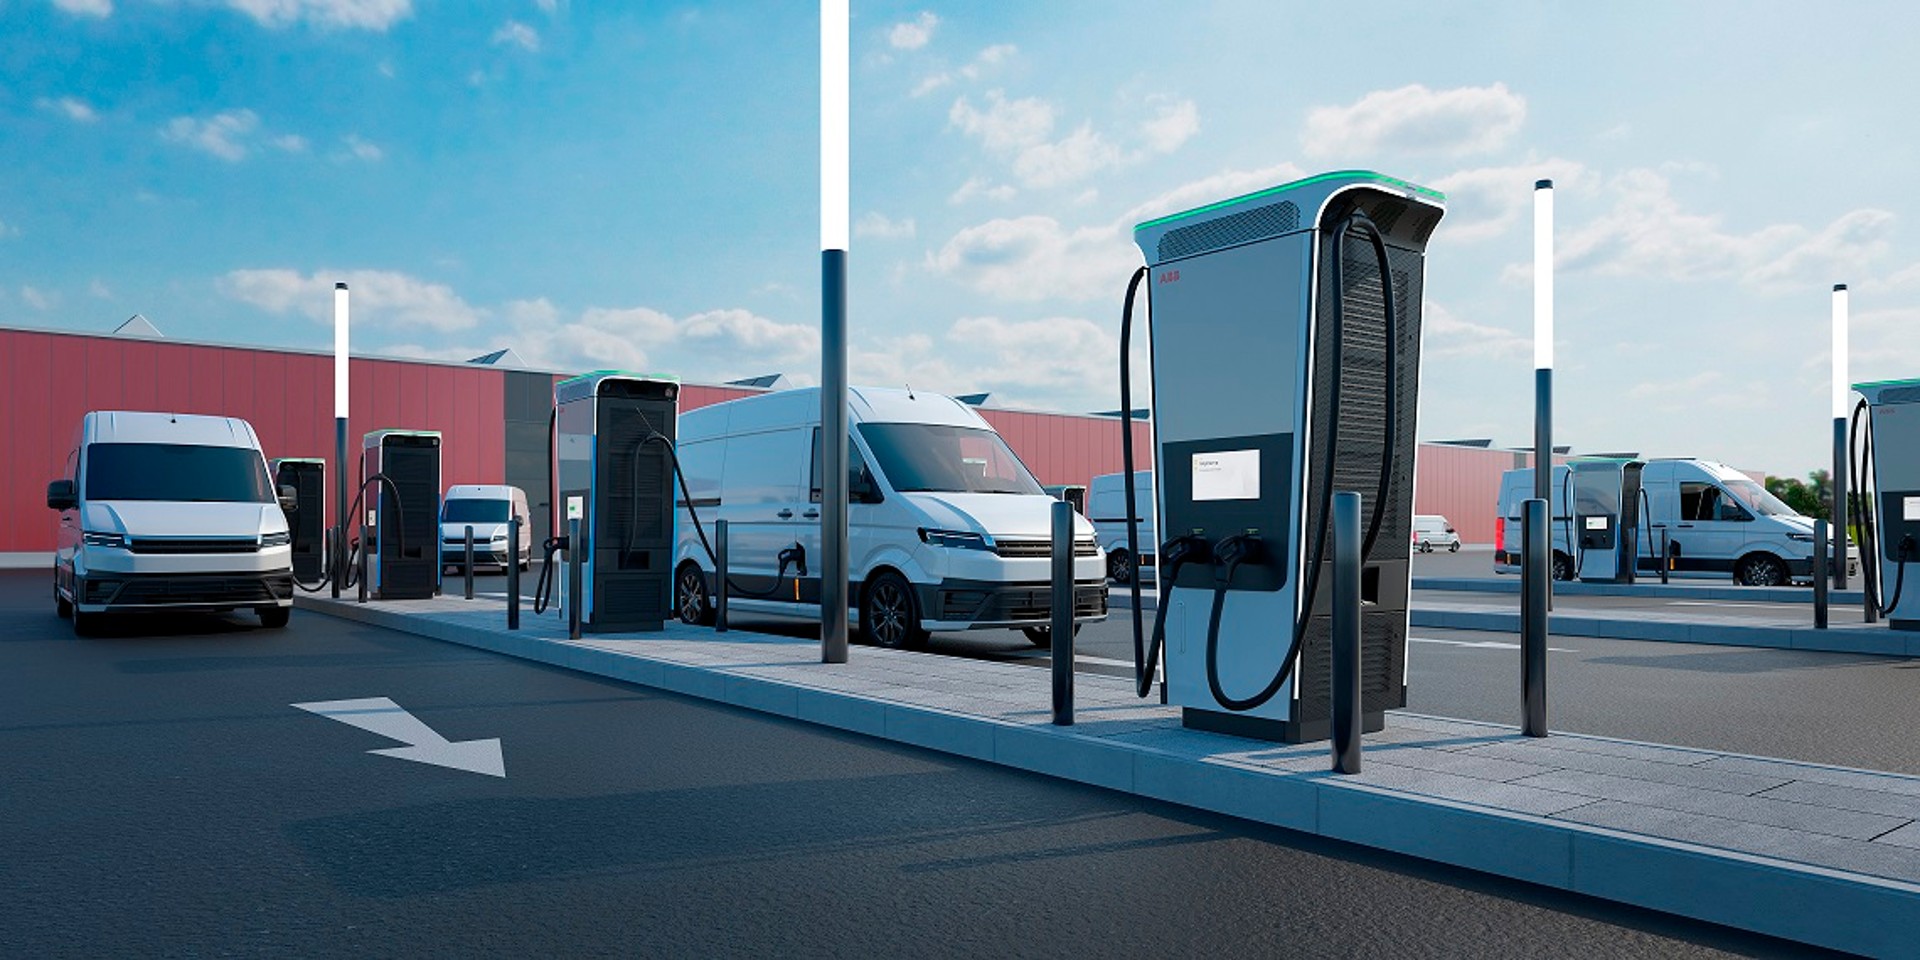 EV charge point for trucks and vans